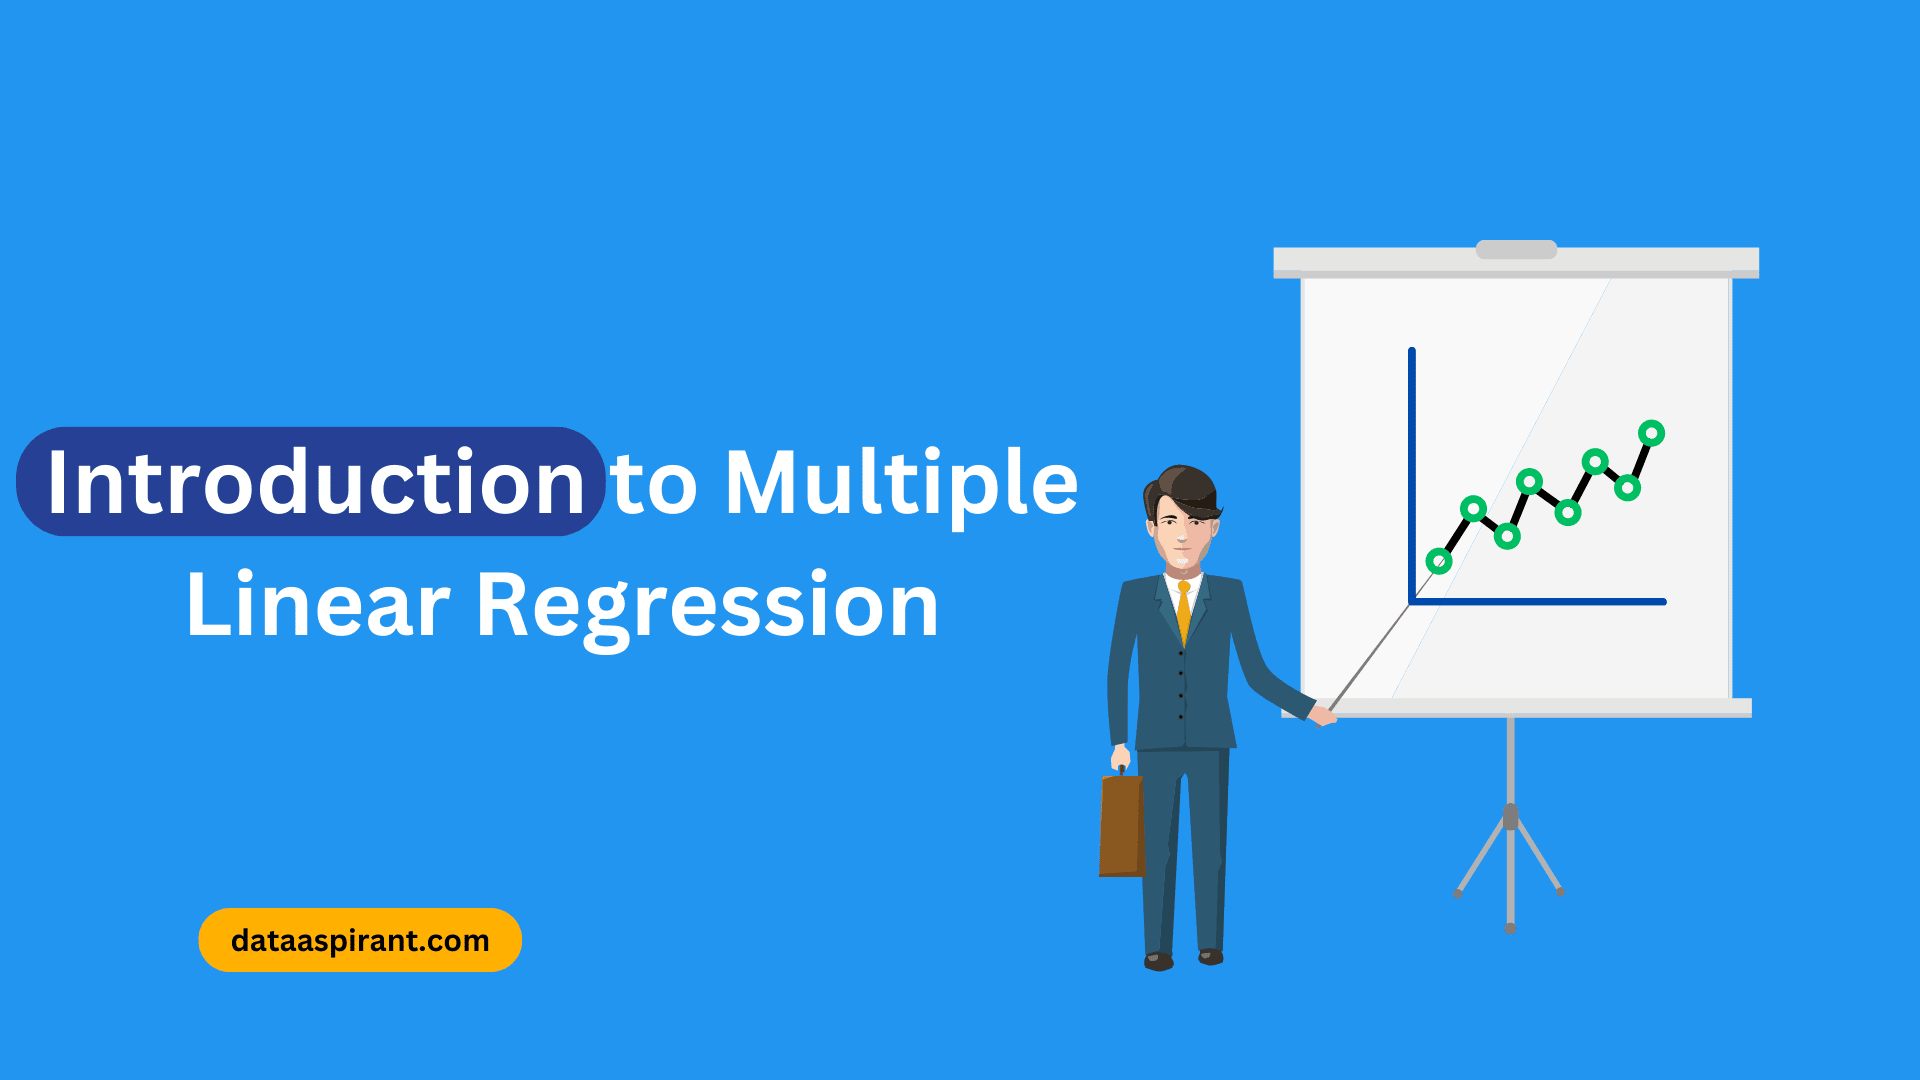 Introduction to Multiple Linear Regression